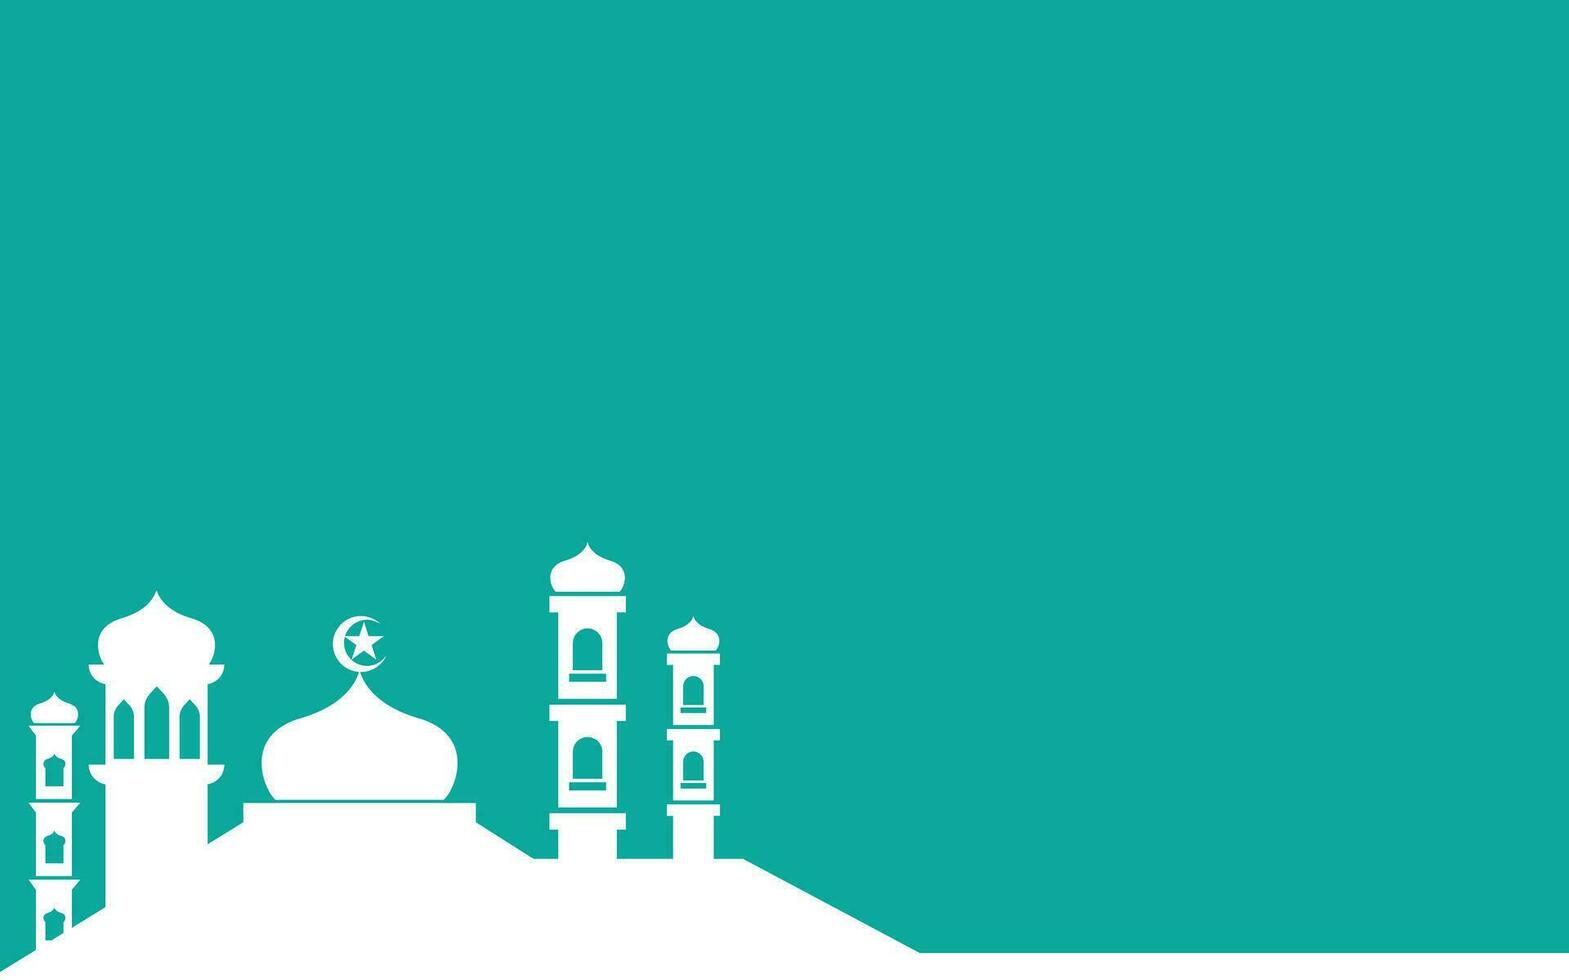 simple islamic mosque background template vector